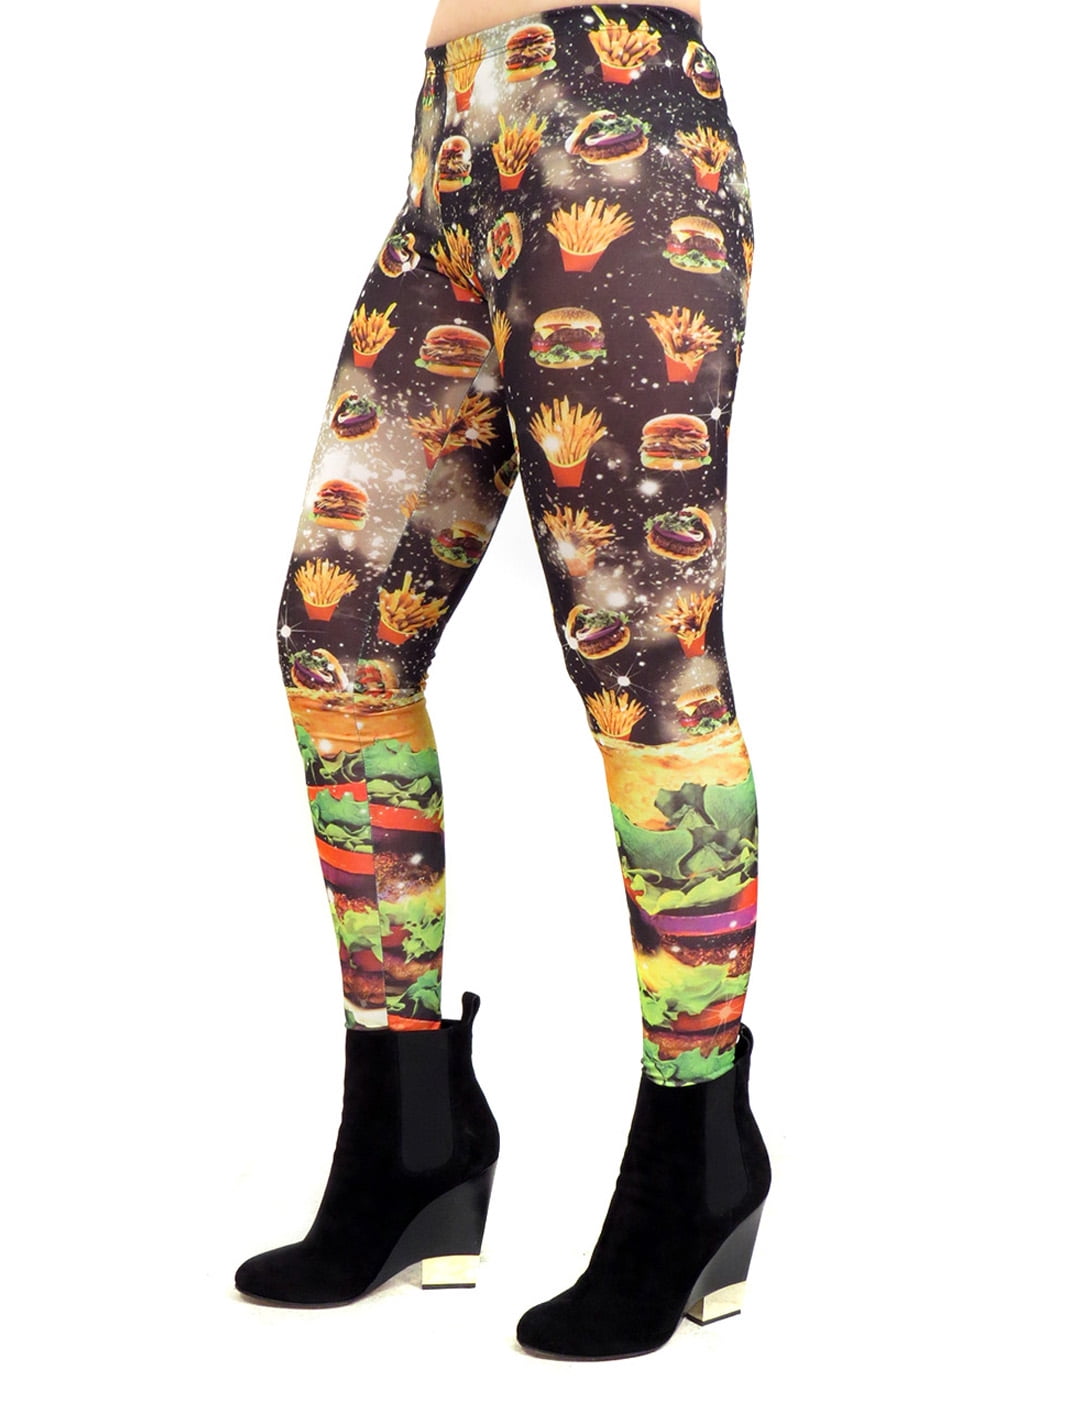 Turkey Pants Fried Chicken Leg Pants Novelty Loose Leggings for Thanksgiving Party Favors